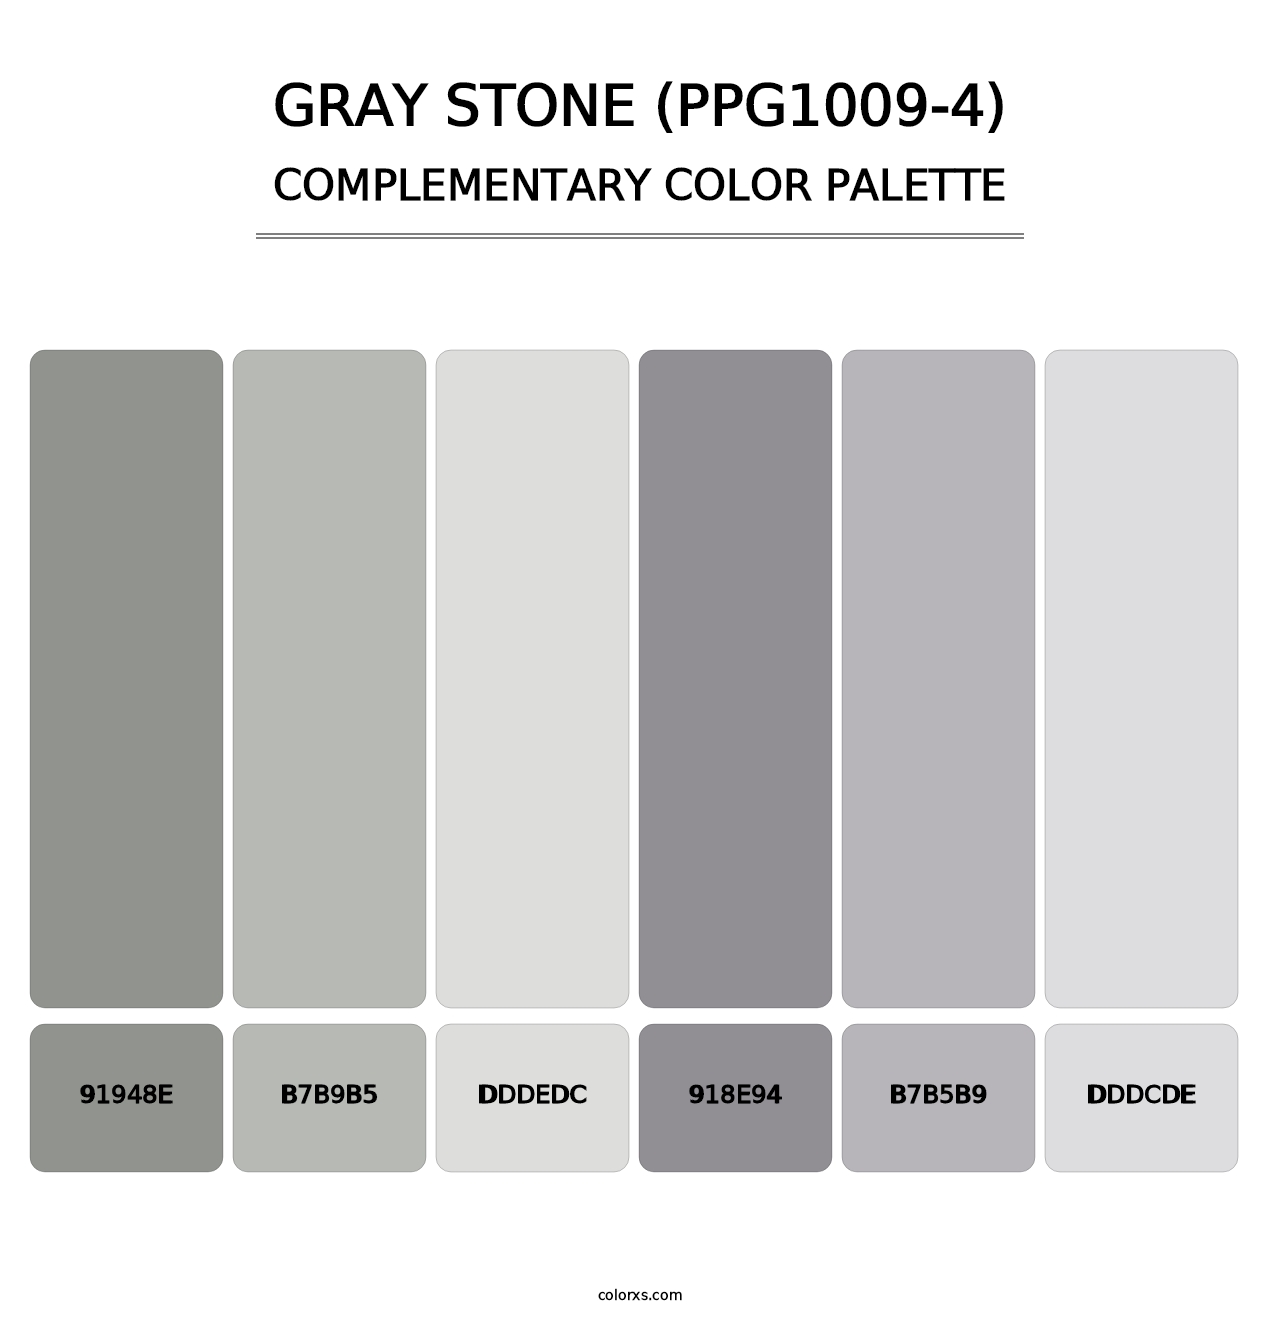 Gray Stone (PPG1009-4) - Complementary Color Palette